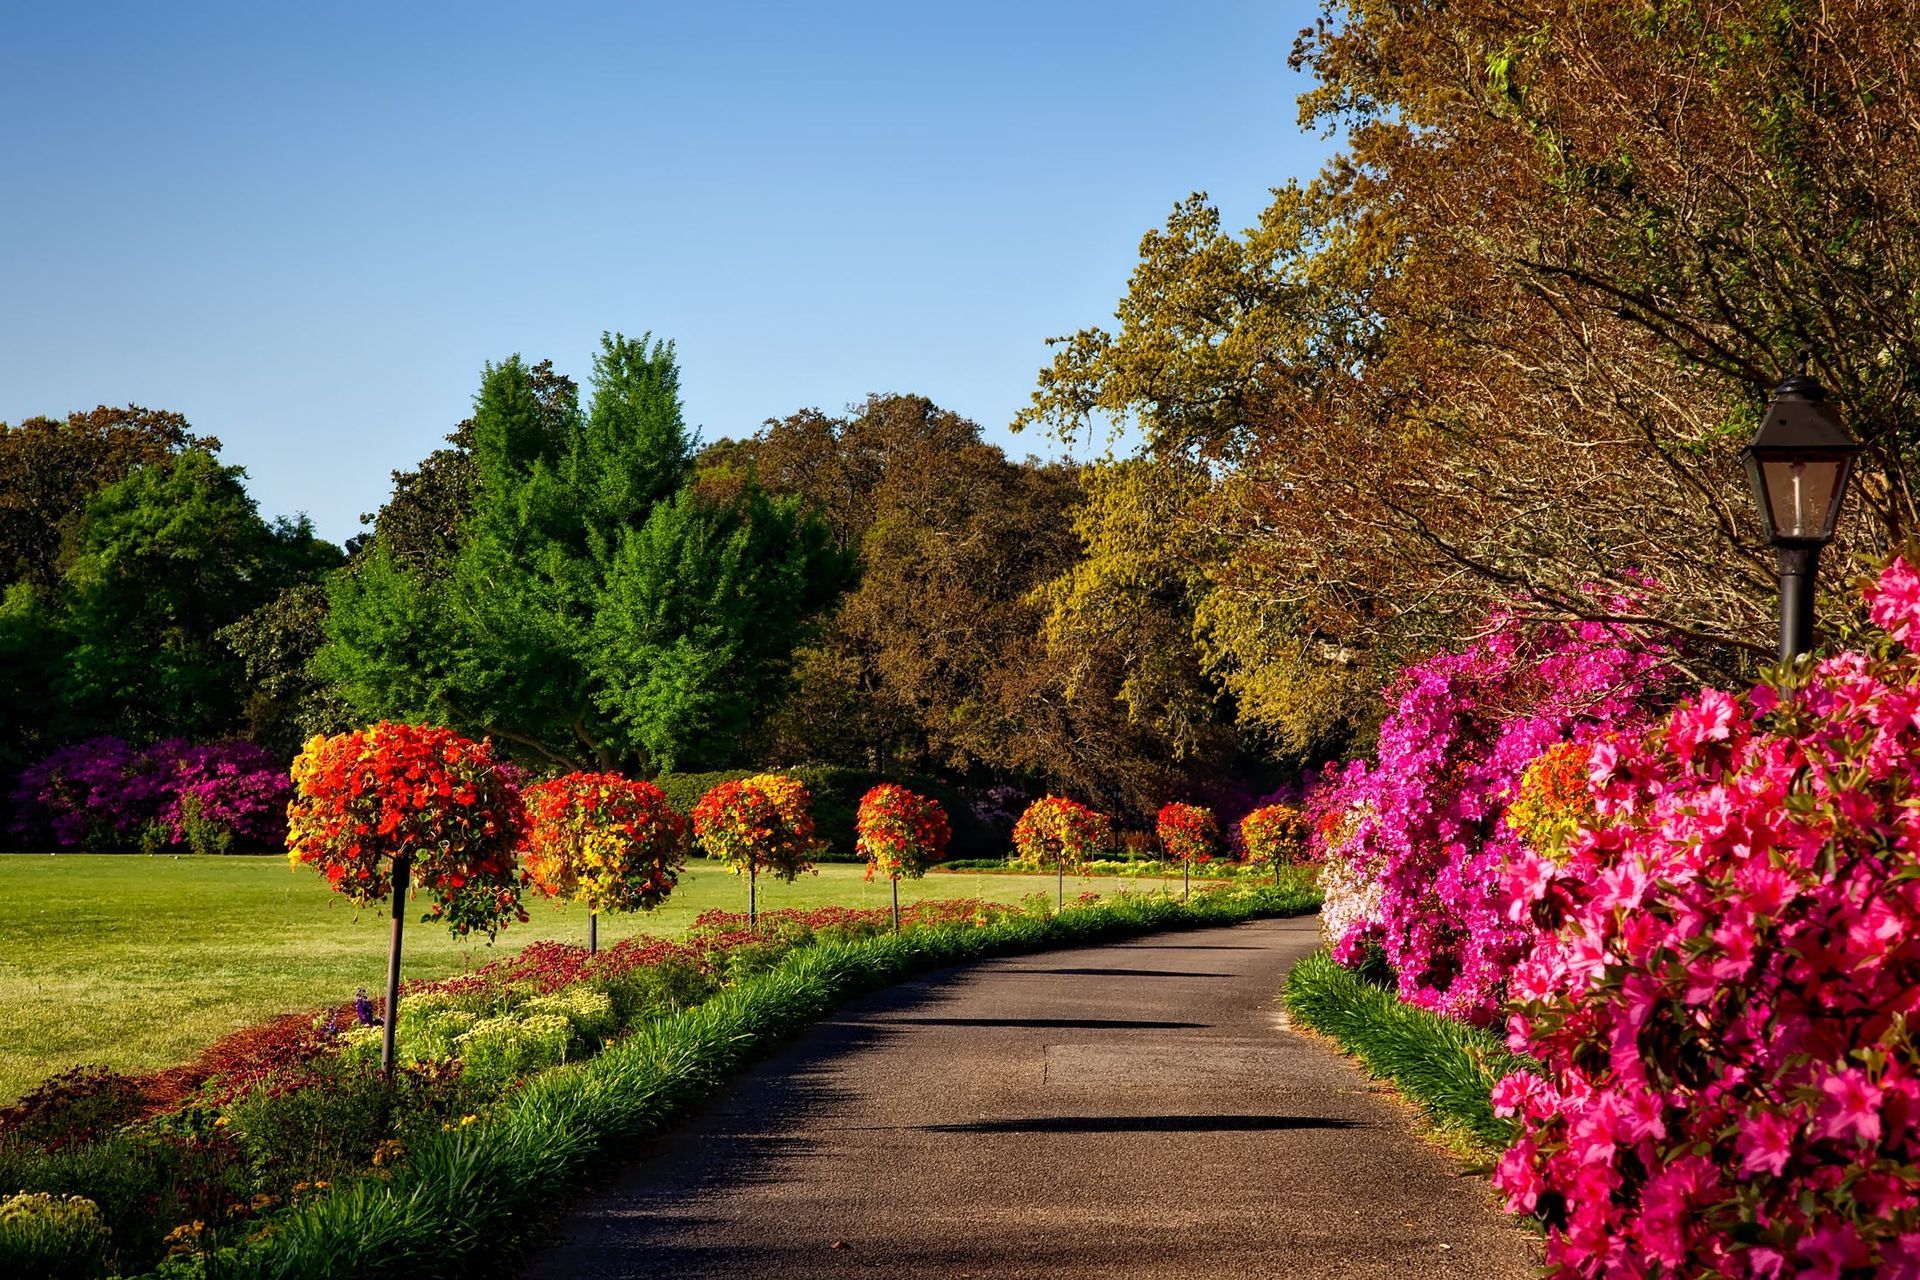 A path surrounded by flowers and trees in a park